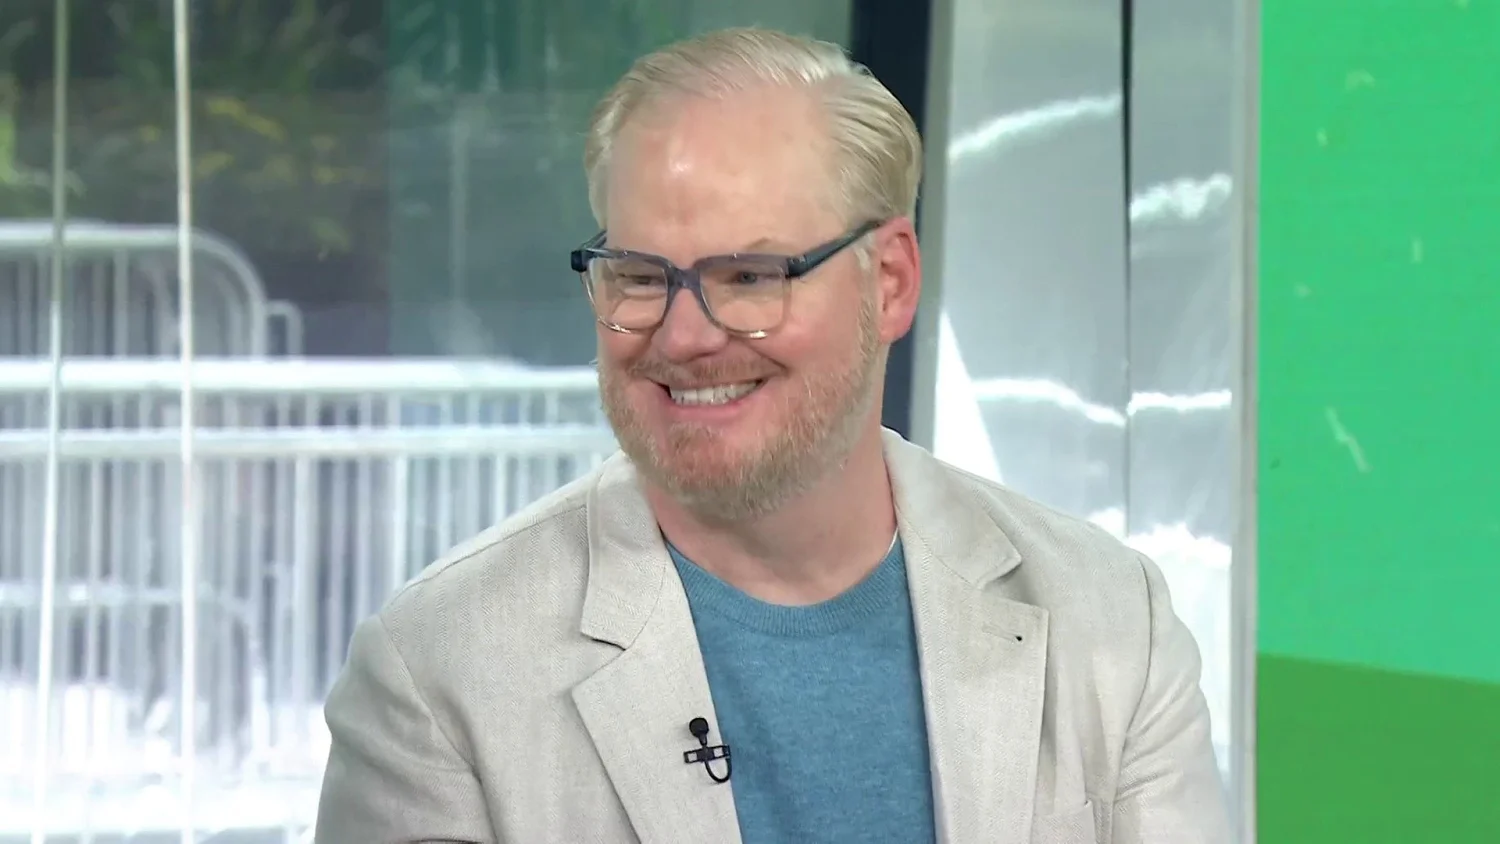 Comedian and actor, Jim Gaffigan (Credits: The Today Show)